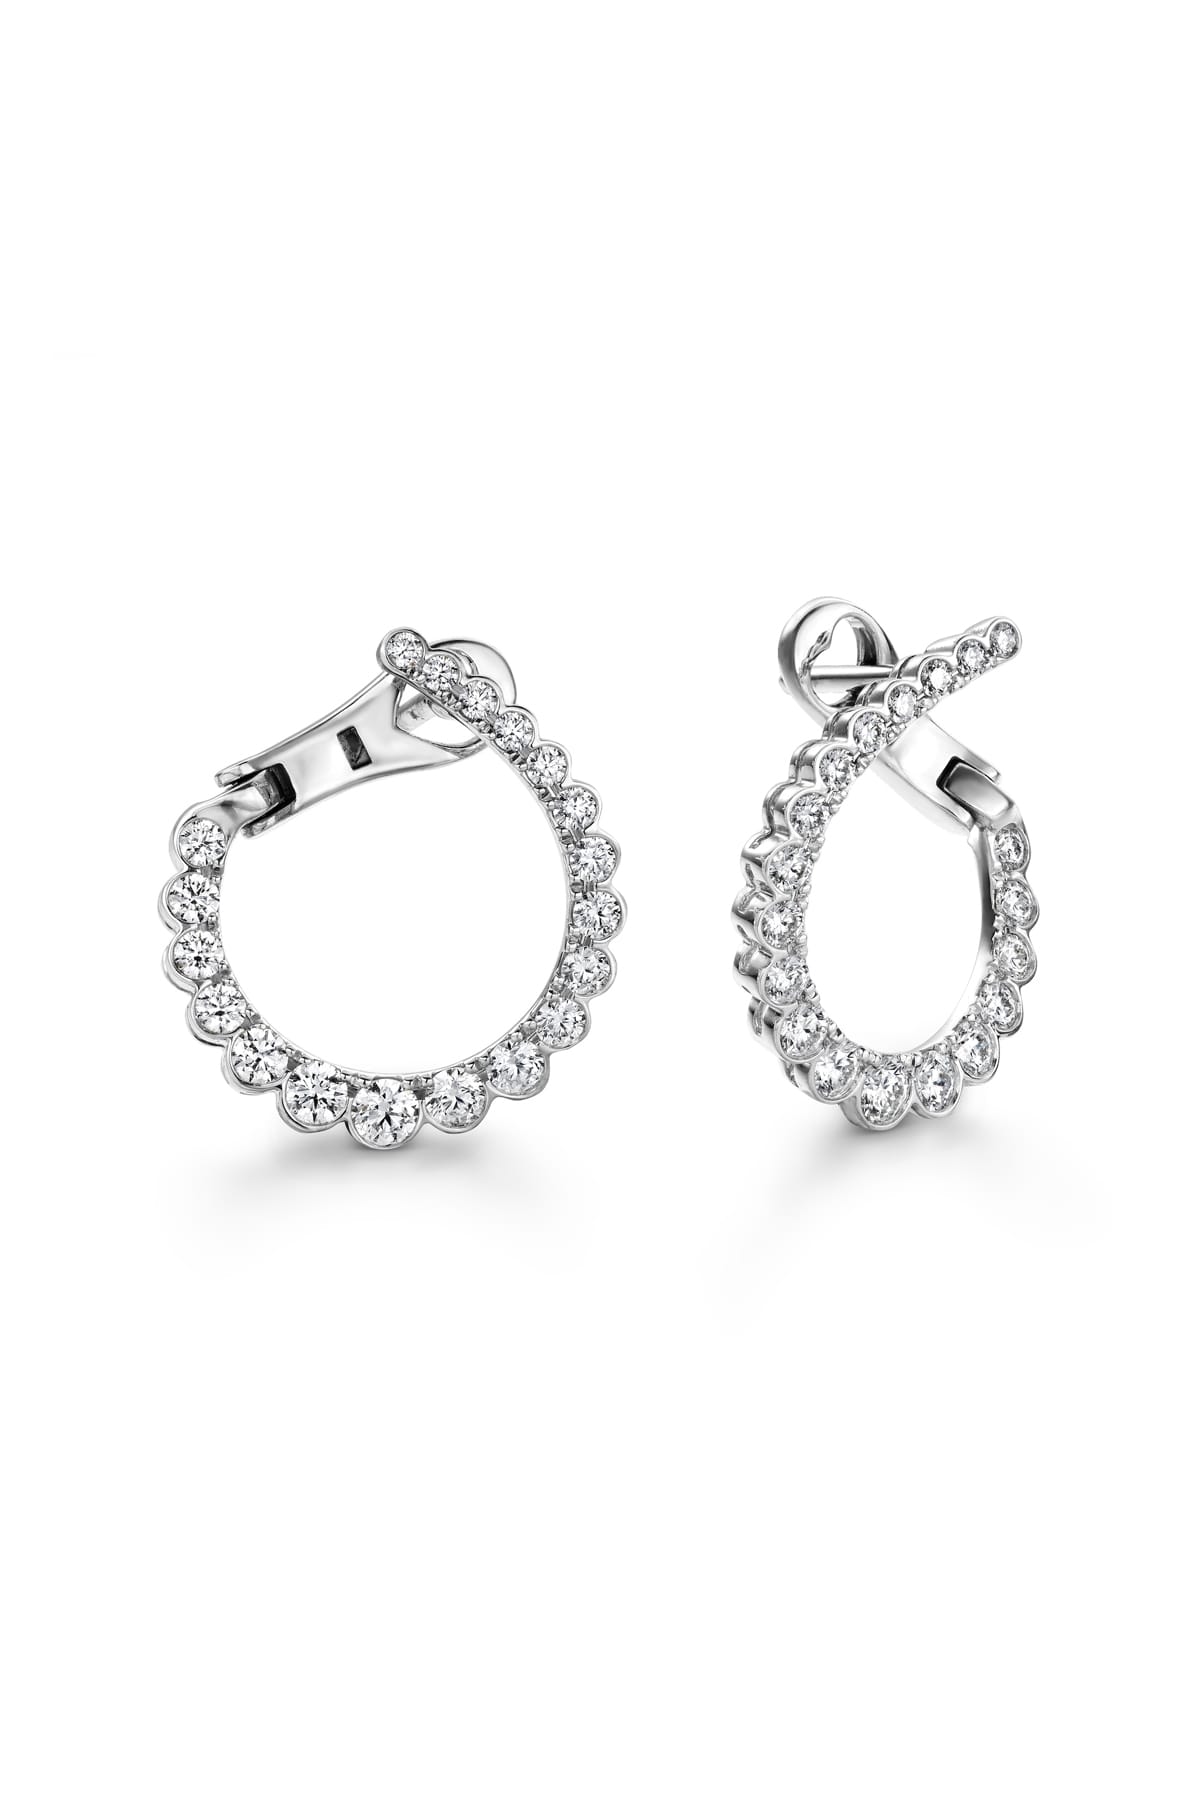 Aerial Regal Diamond Hoop Earrings From Hearts On Fire From Hearts On Fire available at LeGassick Diamonds and Jewellery Gold Coast, Australia.